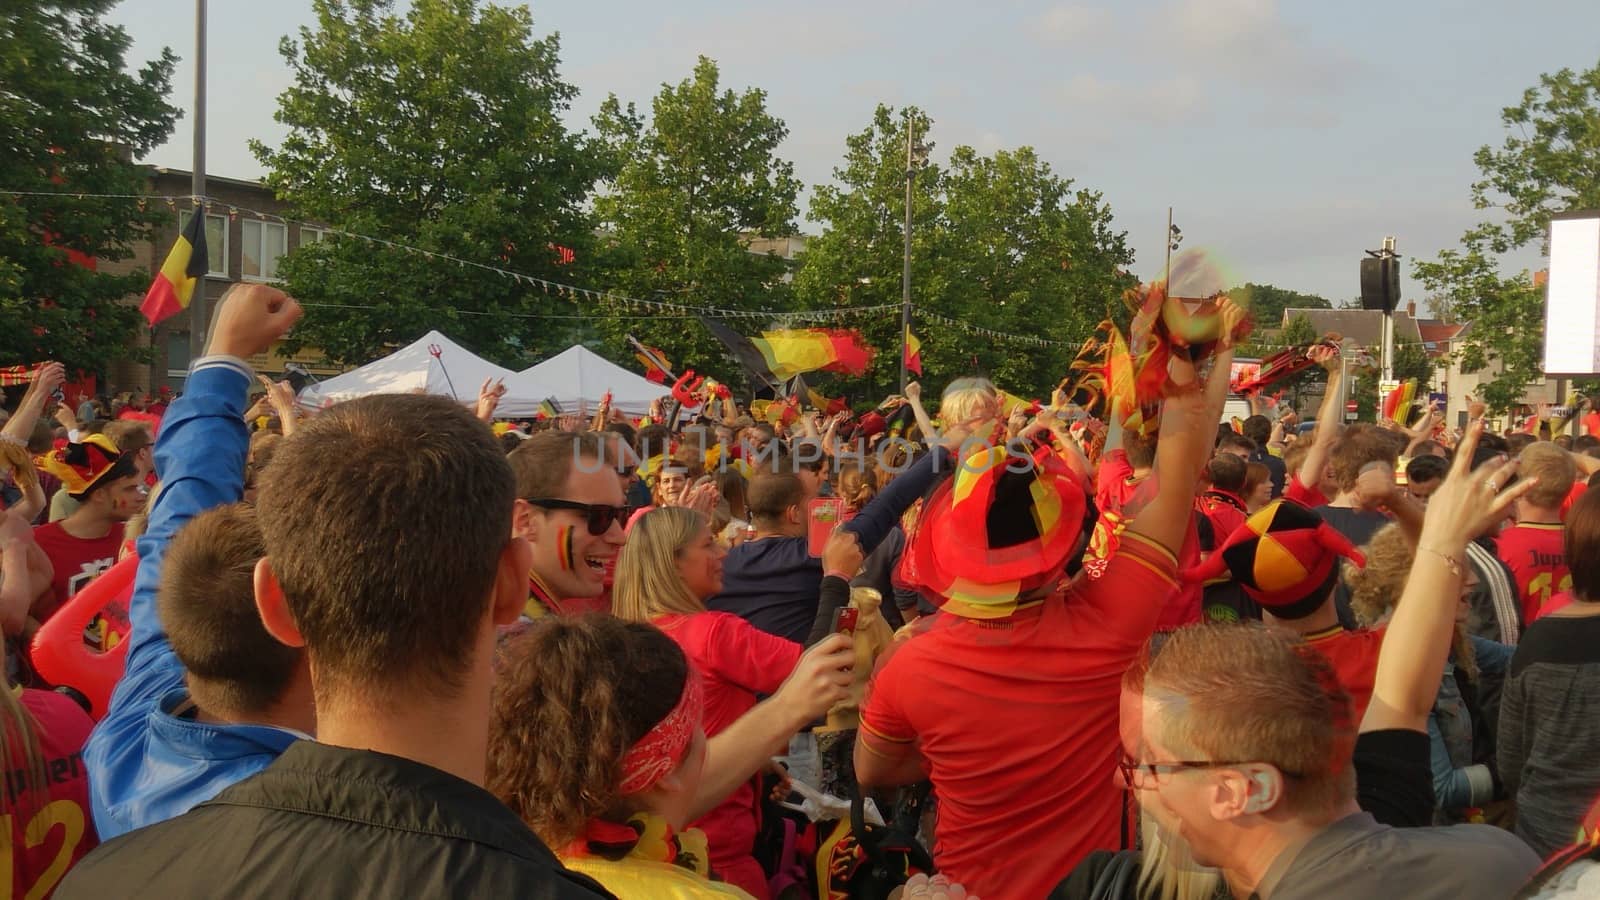 Belgian football fans celebrating a scored goal during a match by kb79